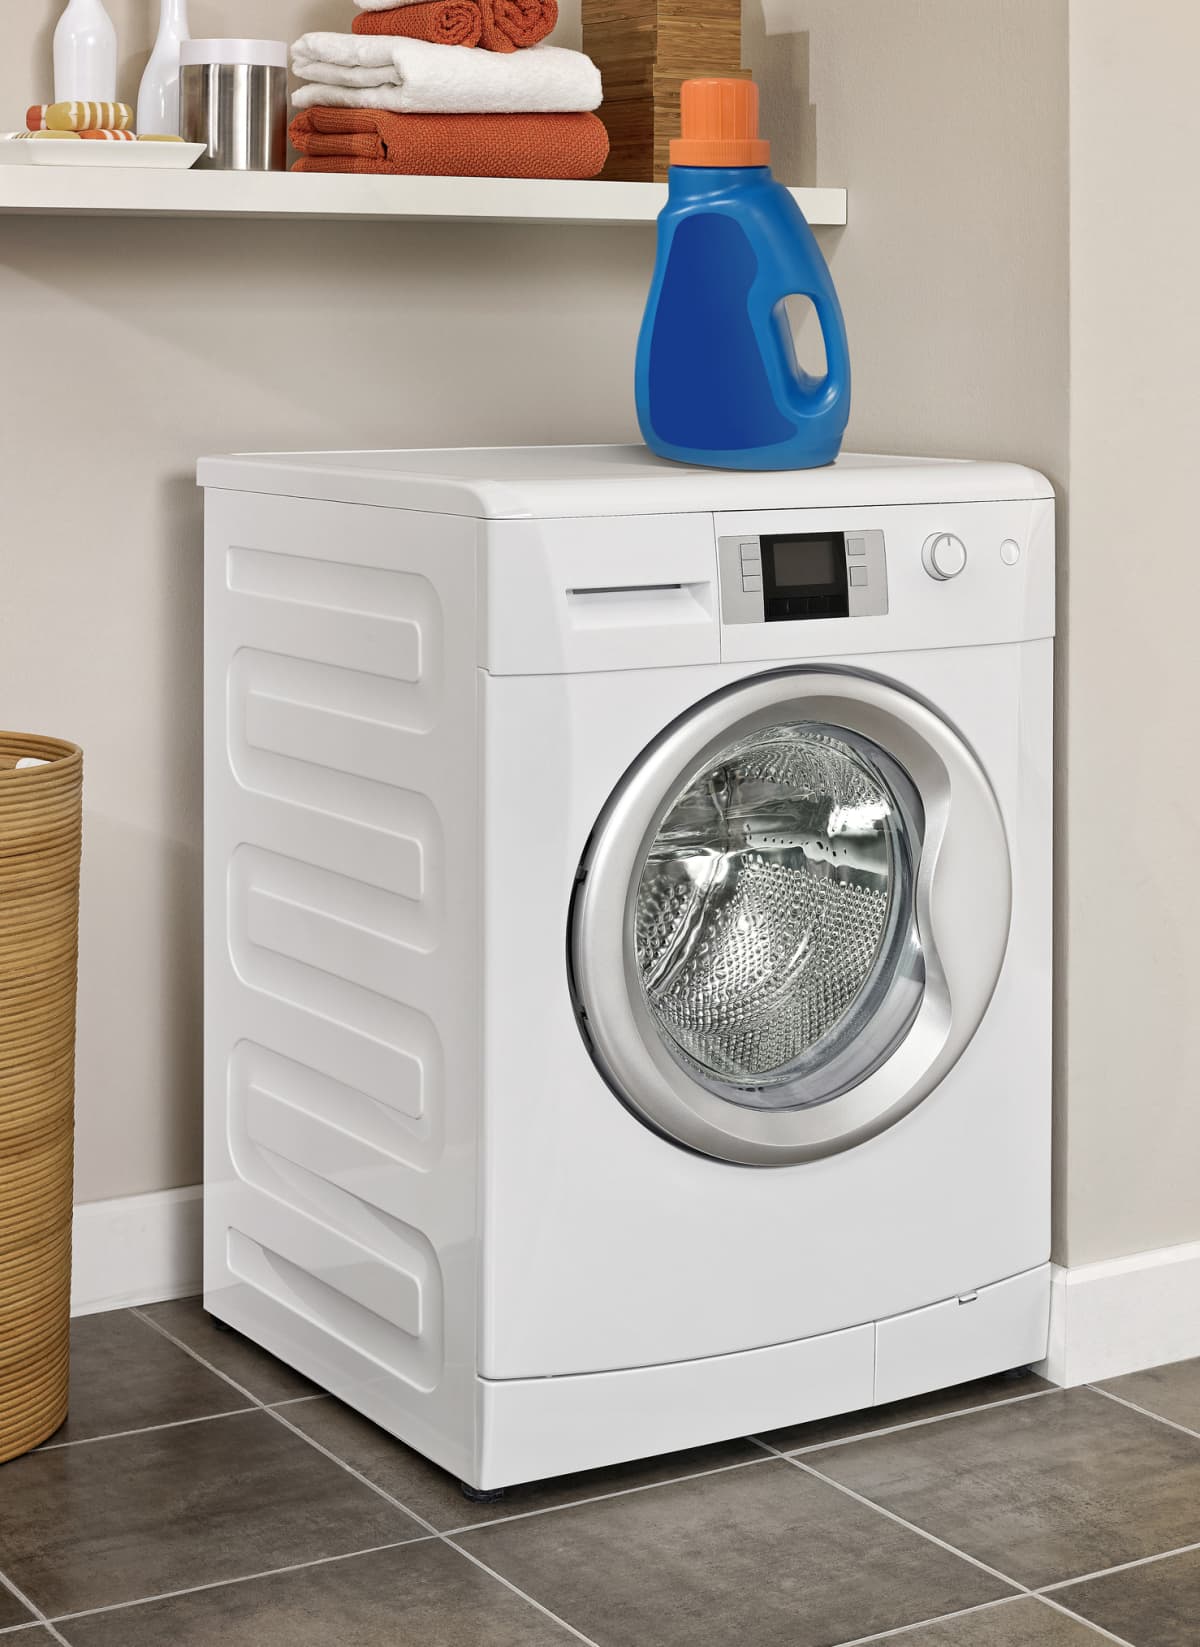 Laundry room with washing machine and laundry detergent